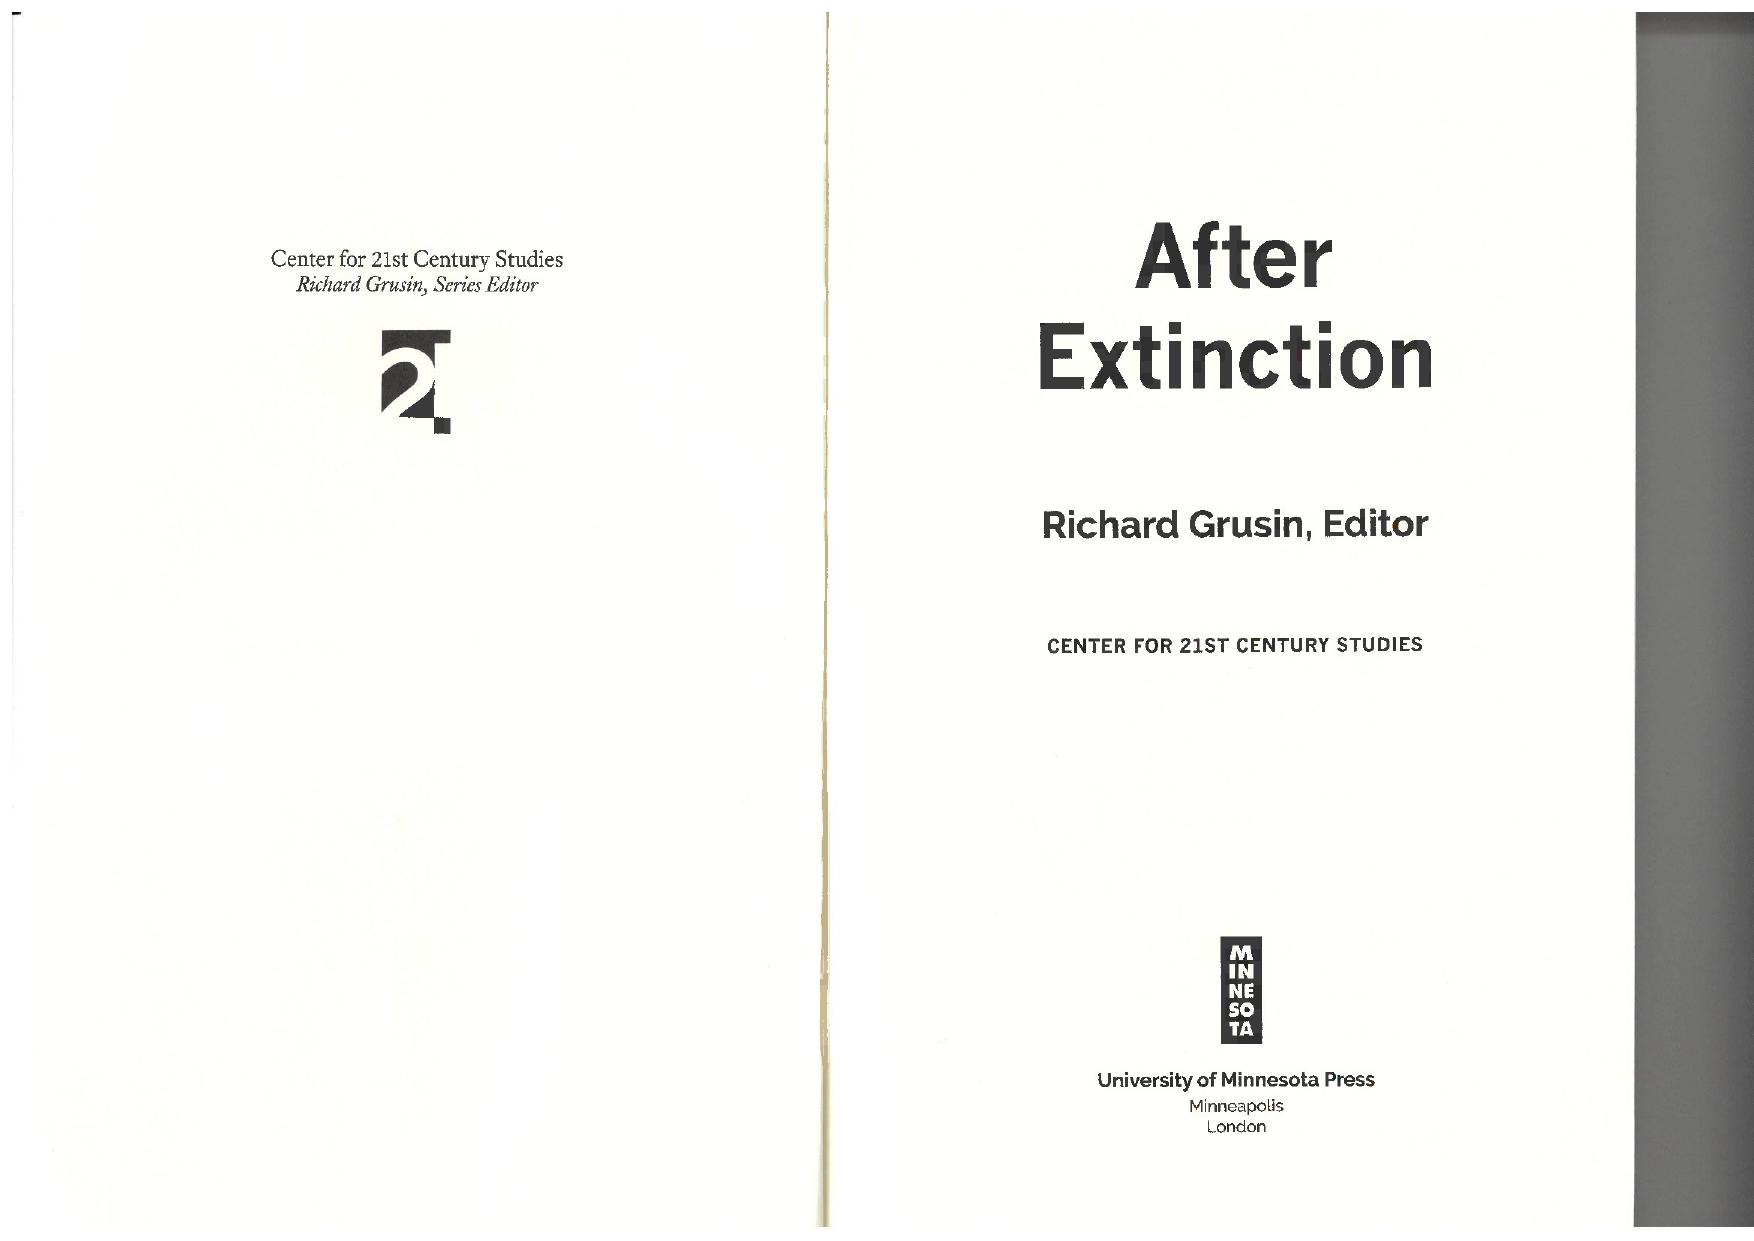 After Extinction by Richard Grusin